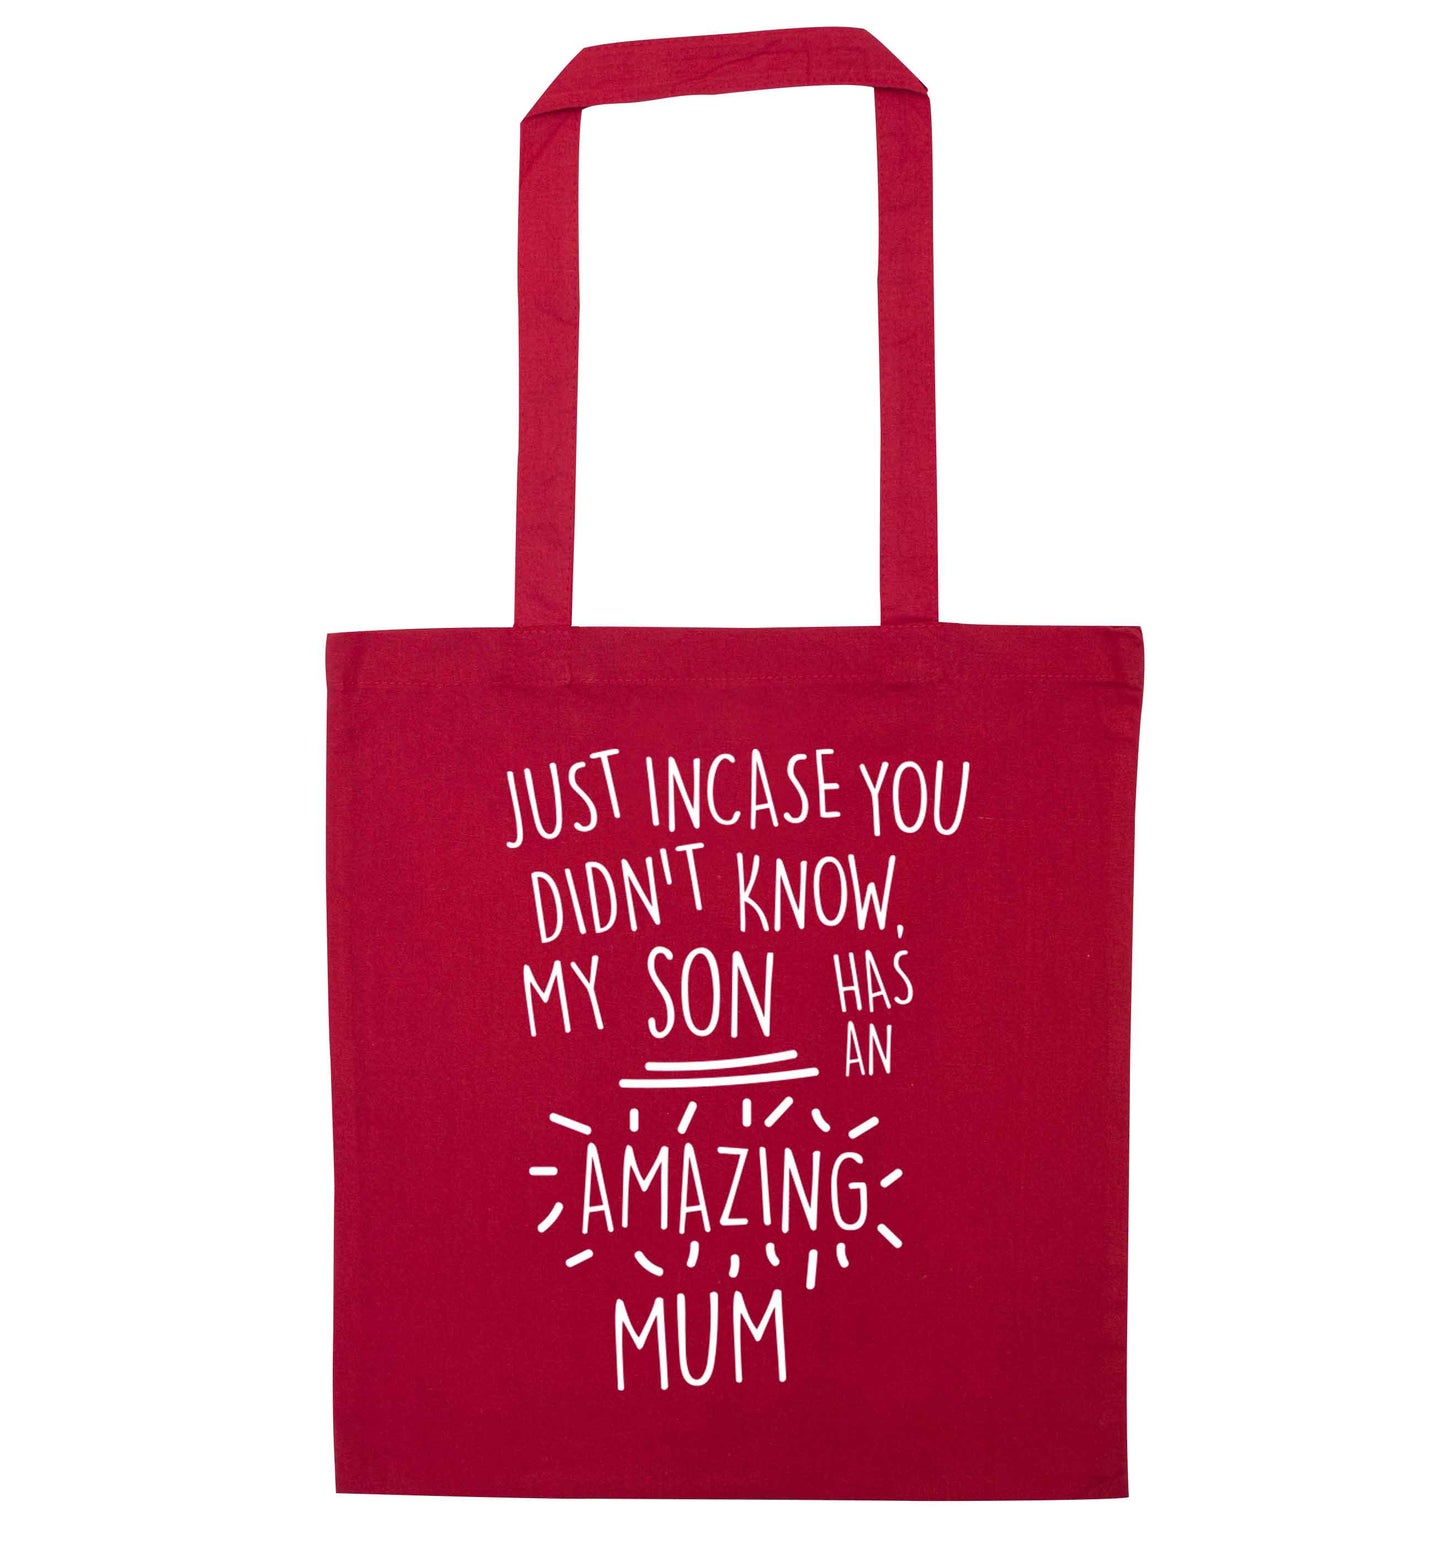 Just incase you didn't know my son has an amazing mum red tote bag